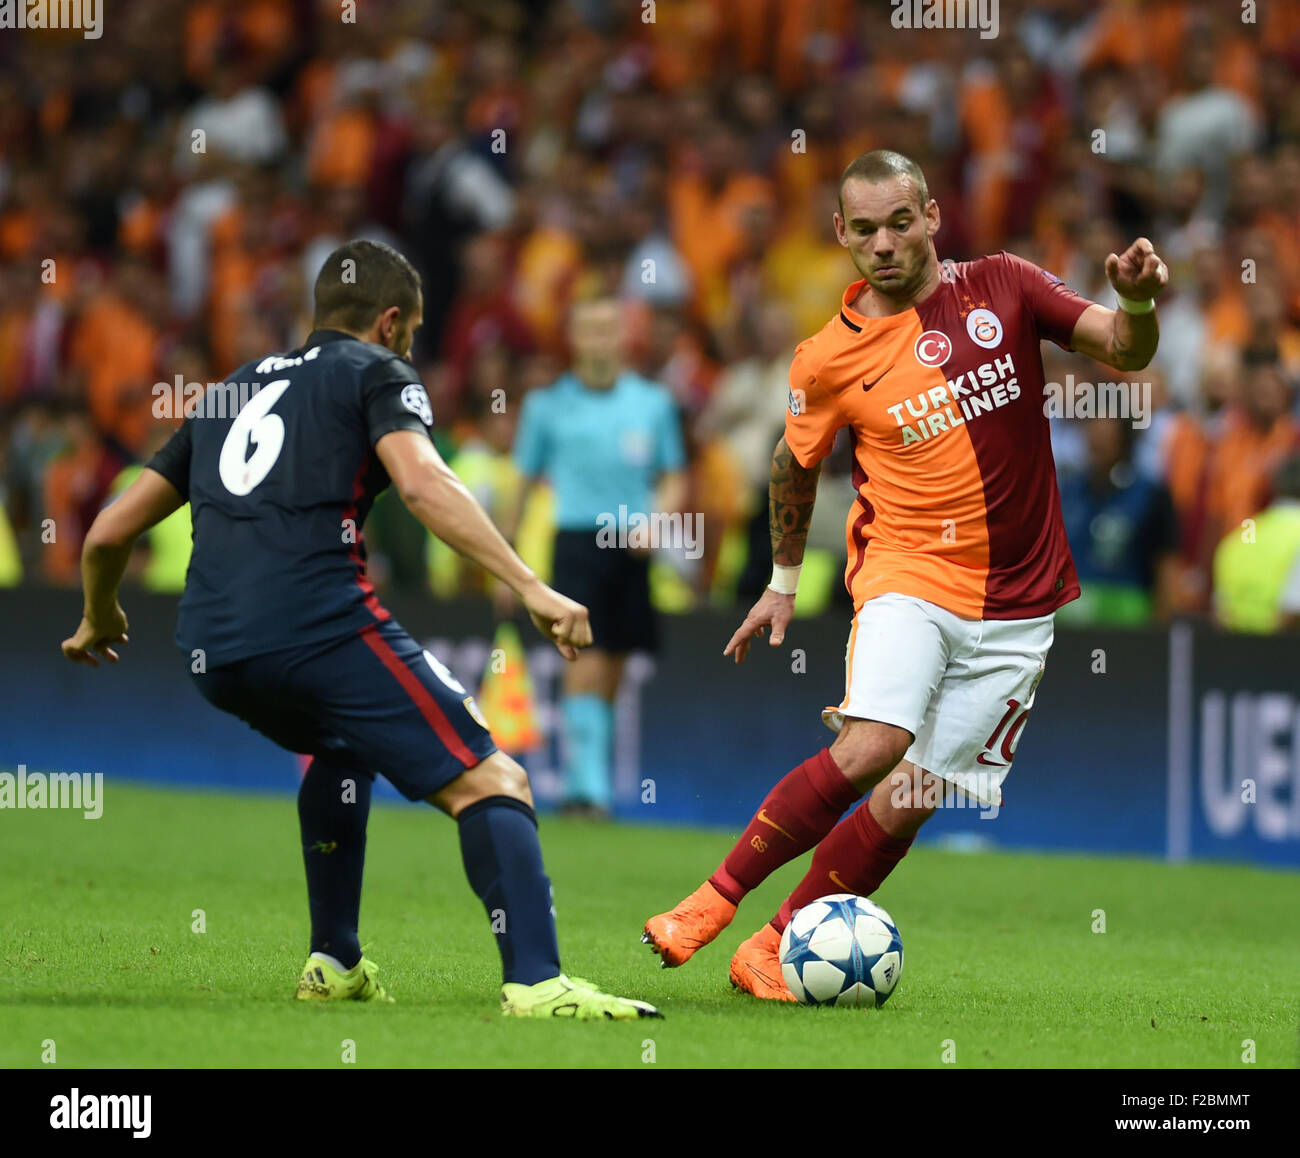 (150916) -- ISTANBUL, Sept. 16, 2015(Xinhua) -- Wesley Sneijder (R) of Turkey's Galatasaray controls the ball during the UEFA Champions League Group C match against Spain's Madrid Athletic in Istanbul, Turkey, on Sept. 15, 2015. Madrid Athletic won 2-0. (Xinhua/He Canling) Stock Photo